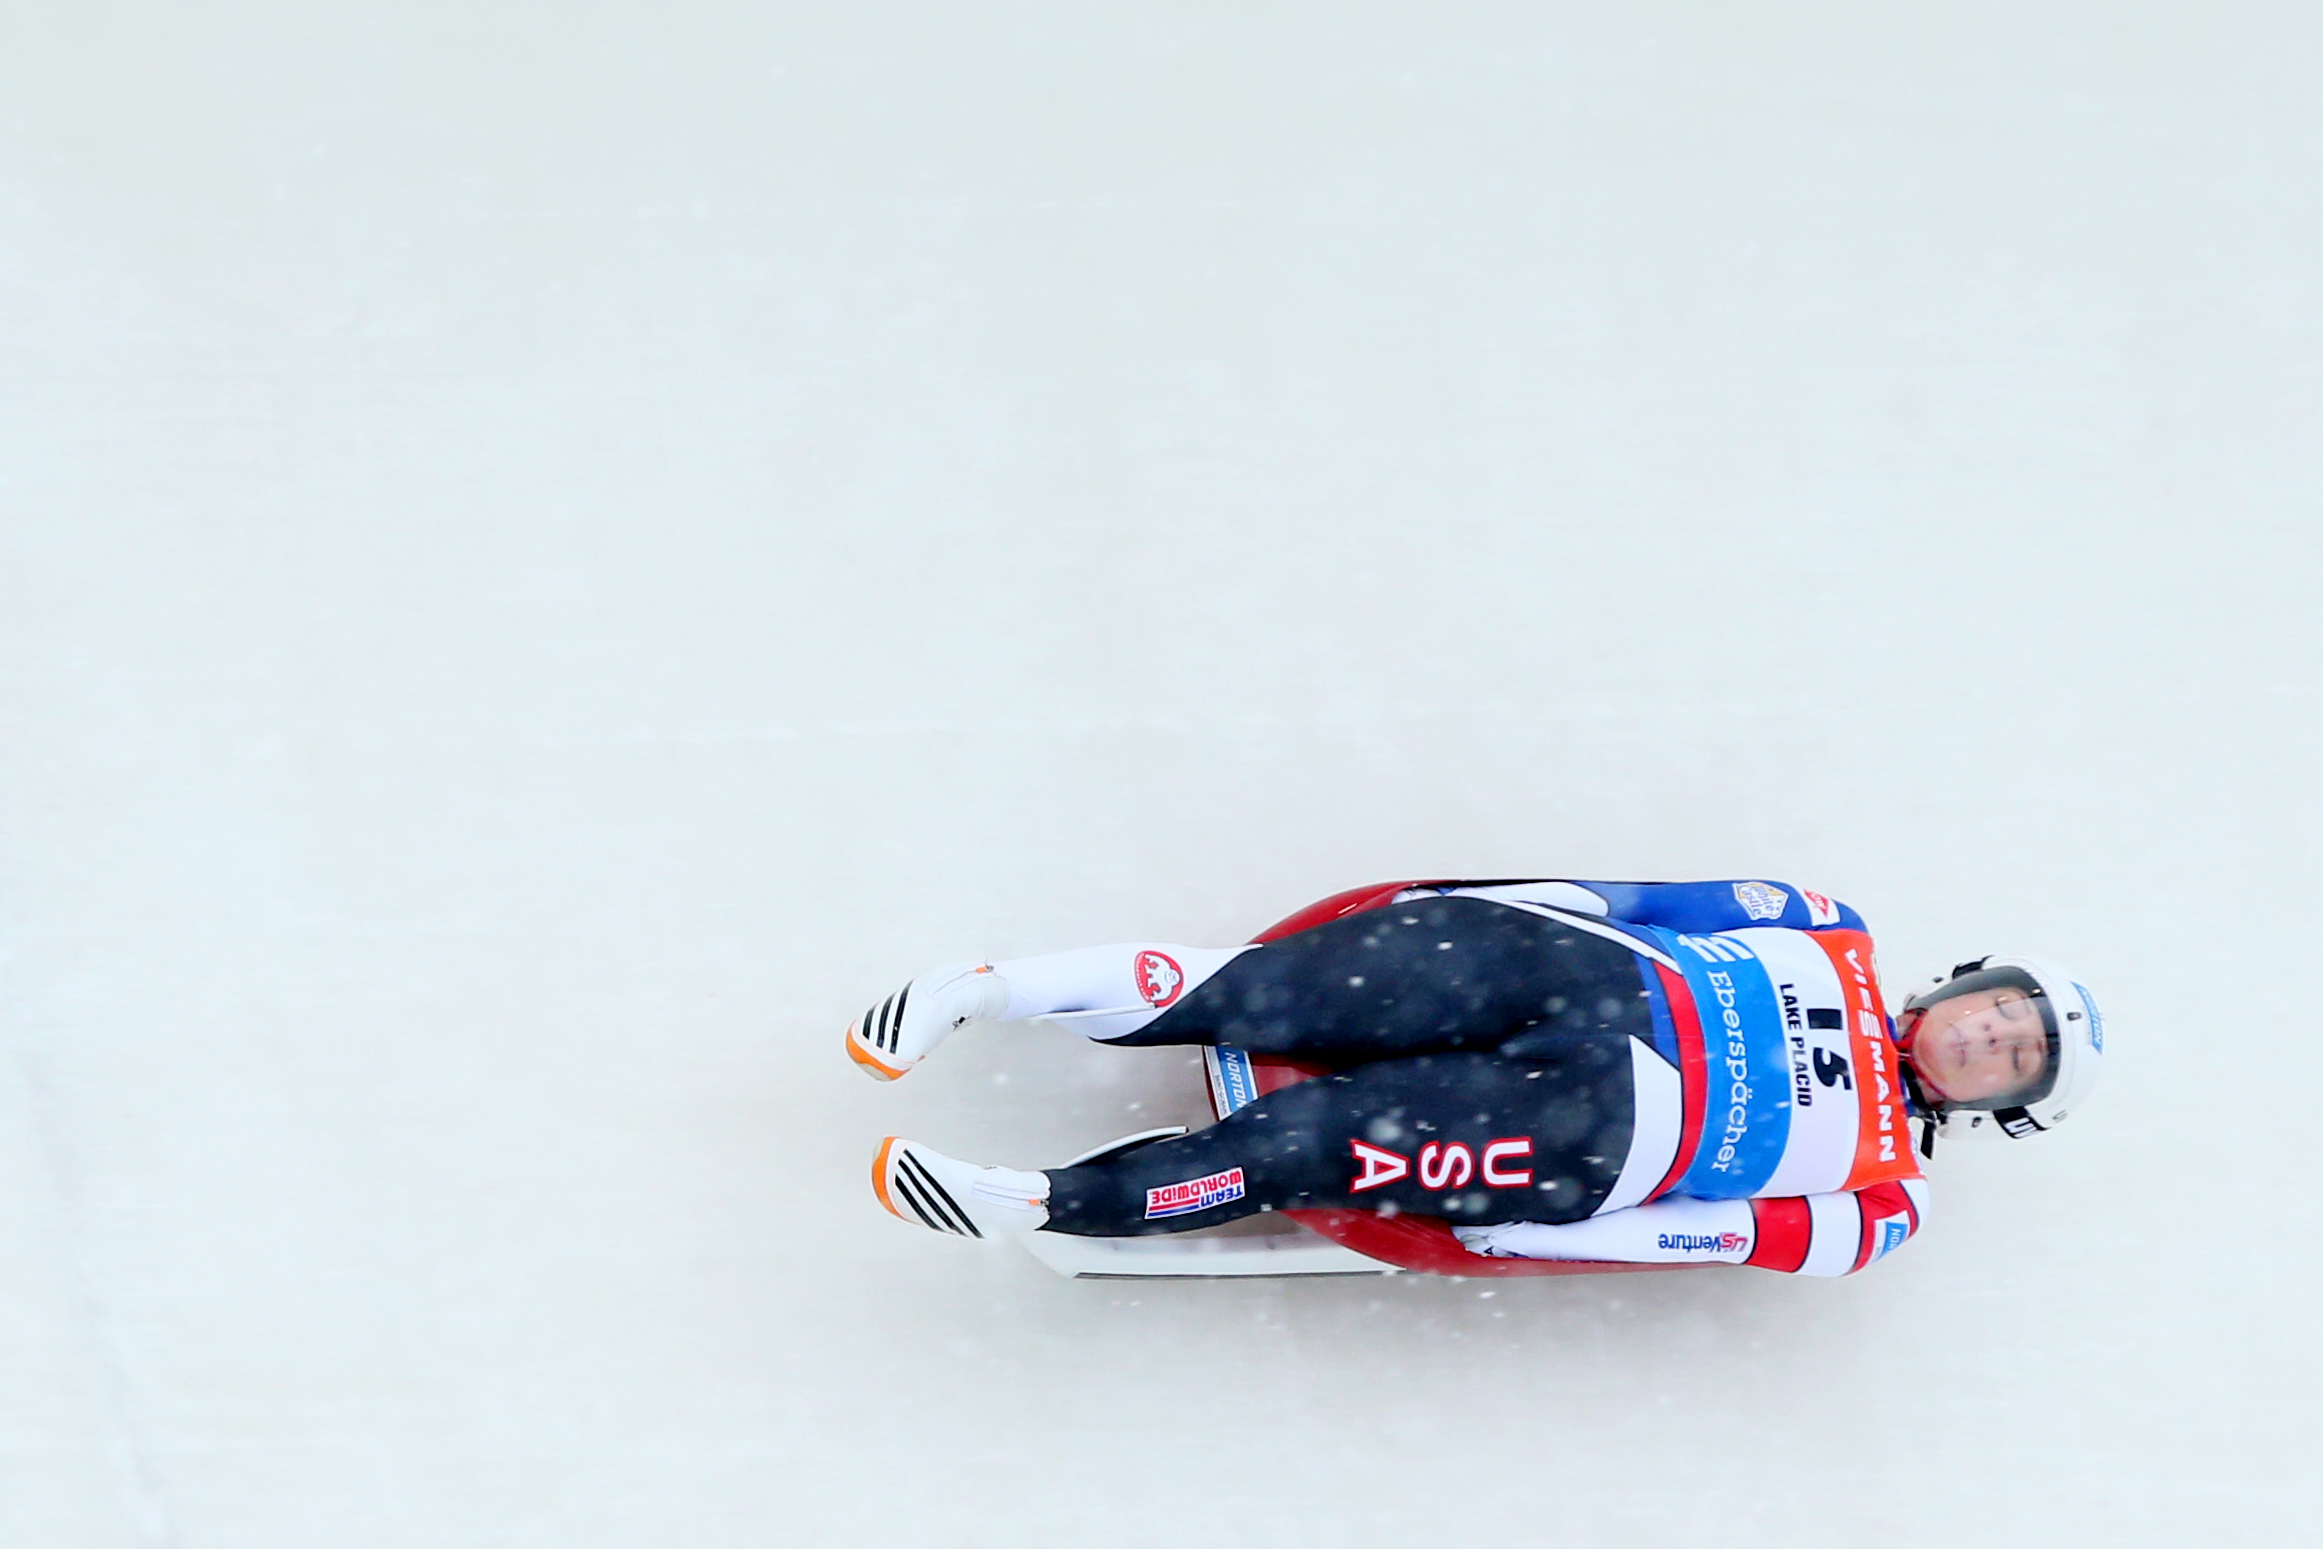 Erin Hamlin of the United States completes her first run in the Women's competition of the Viessmann FIL Luge World Cup at Lake Placid Olympic Center on December 16, 2017 in Lake Placid, New York.Maddie Meyer—Getty Images. (Maddie Meyer—Getty Images.)